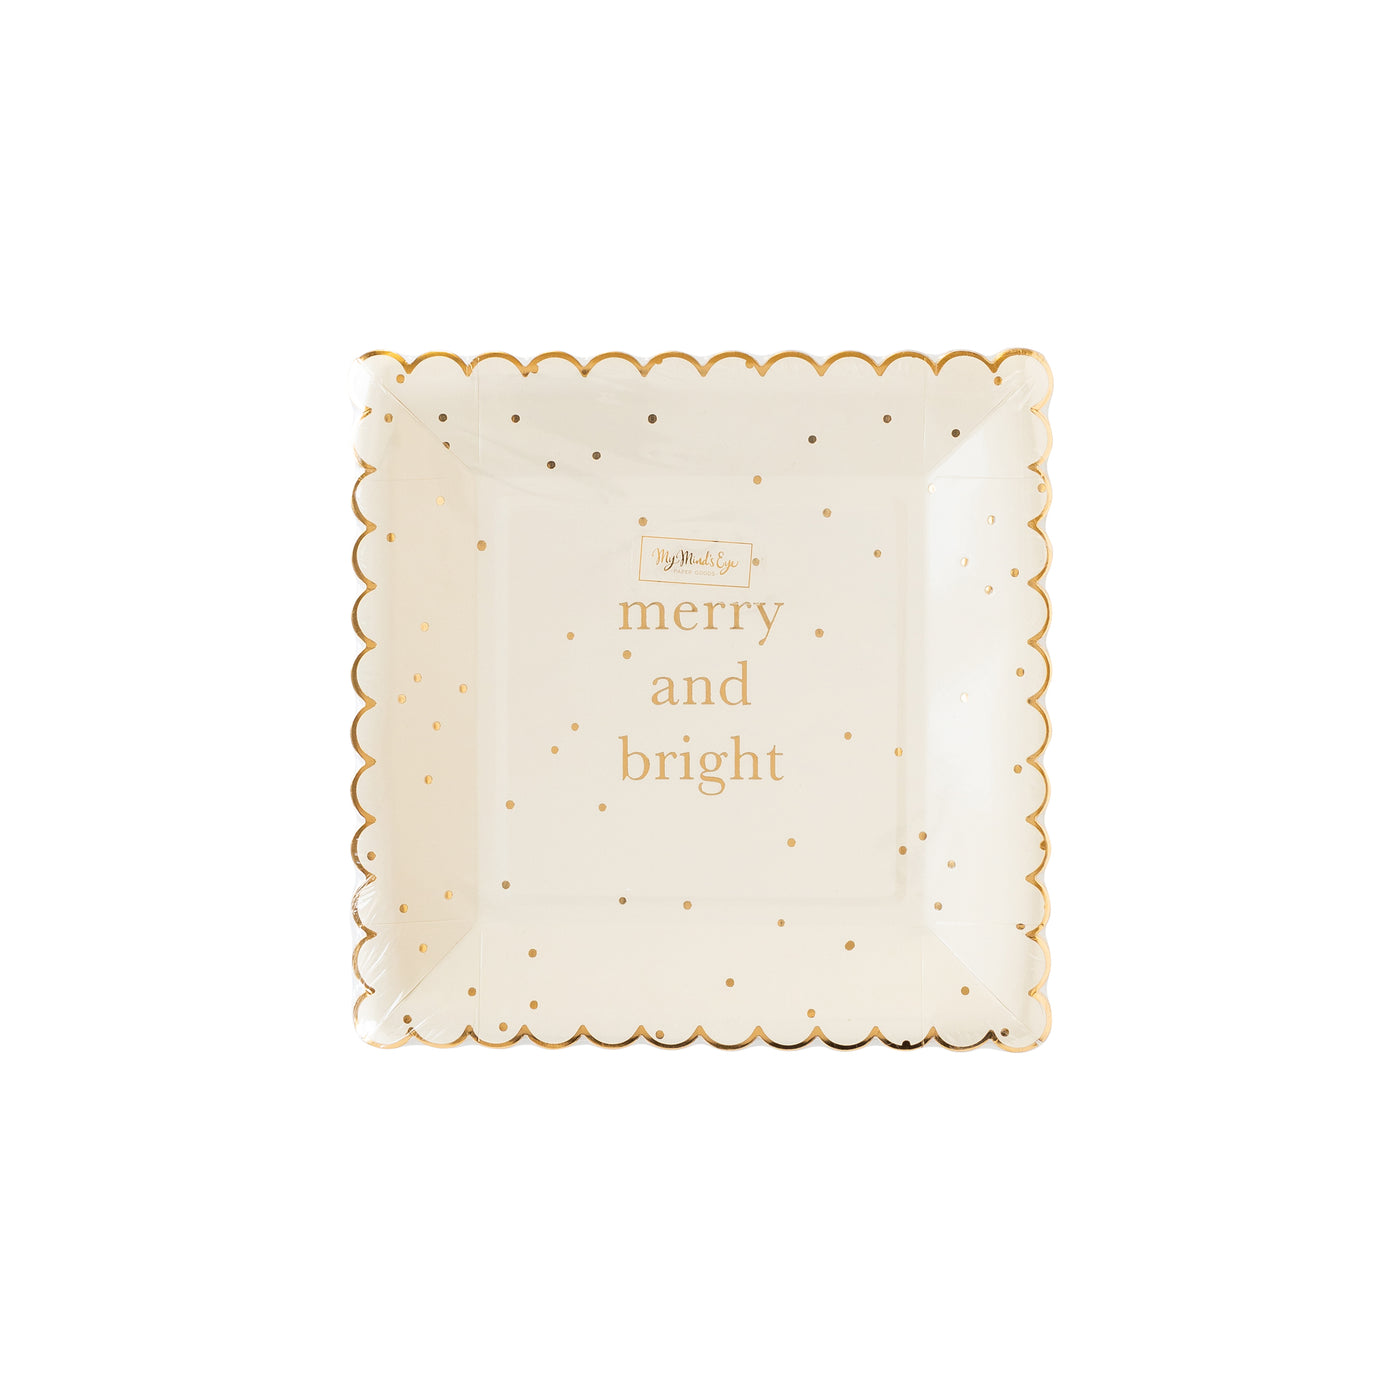 GLD940 - Golden Holiday Merry & Bright Plate